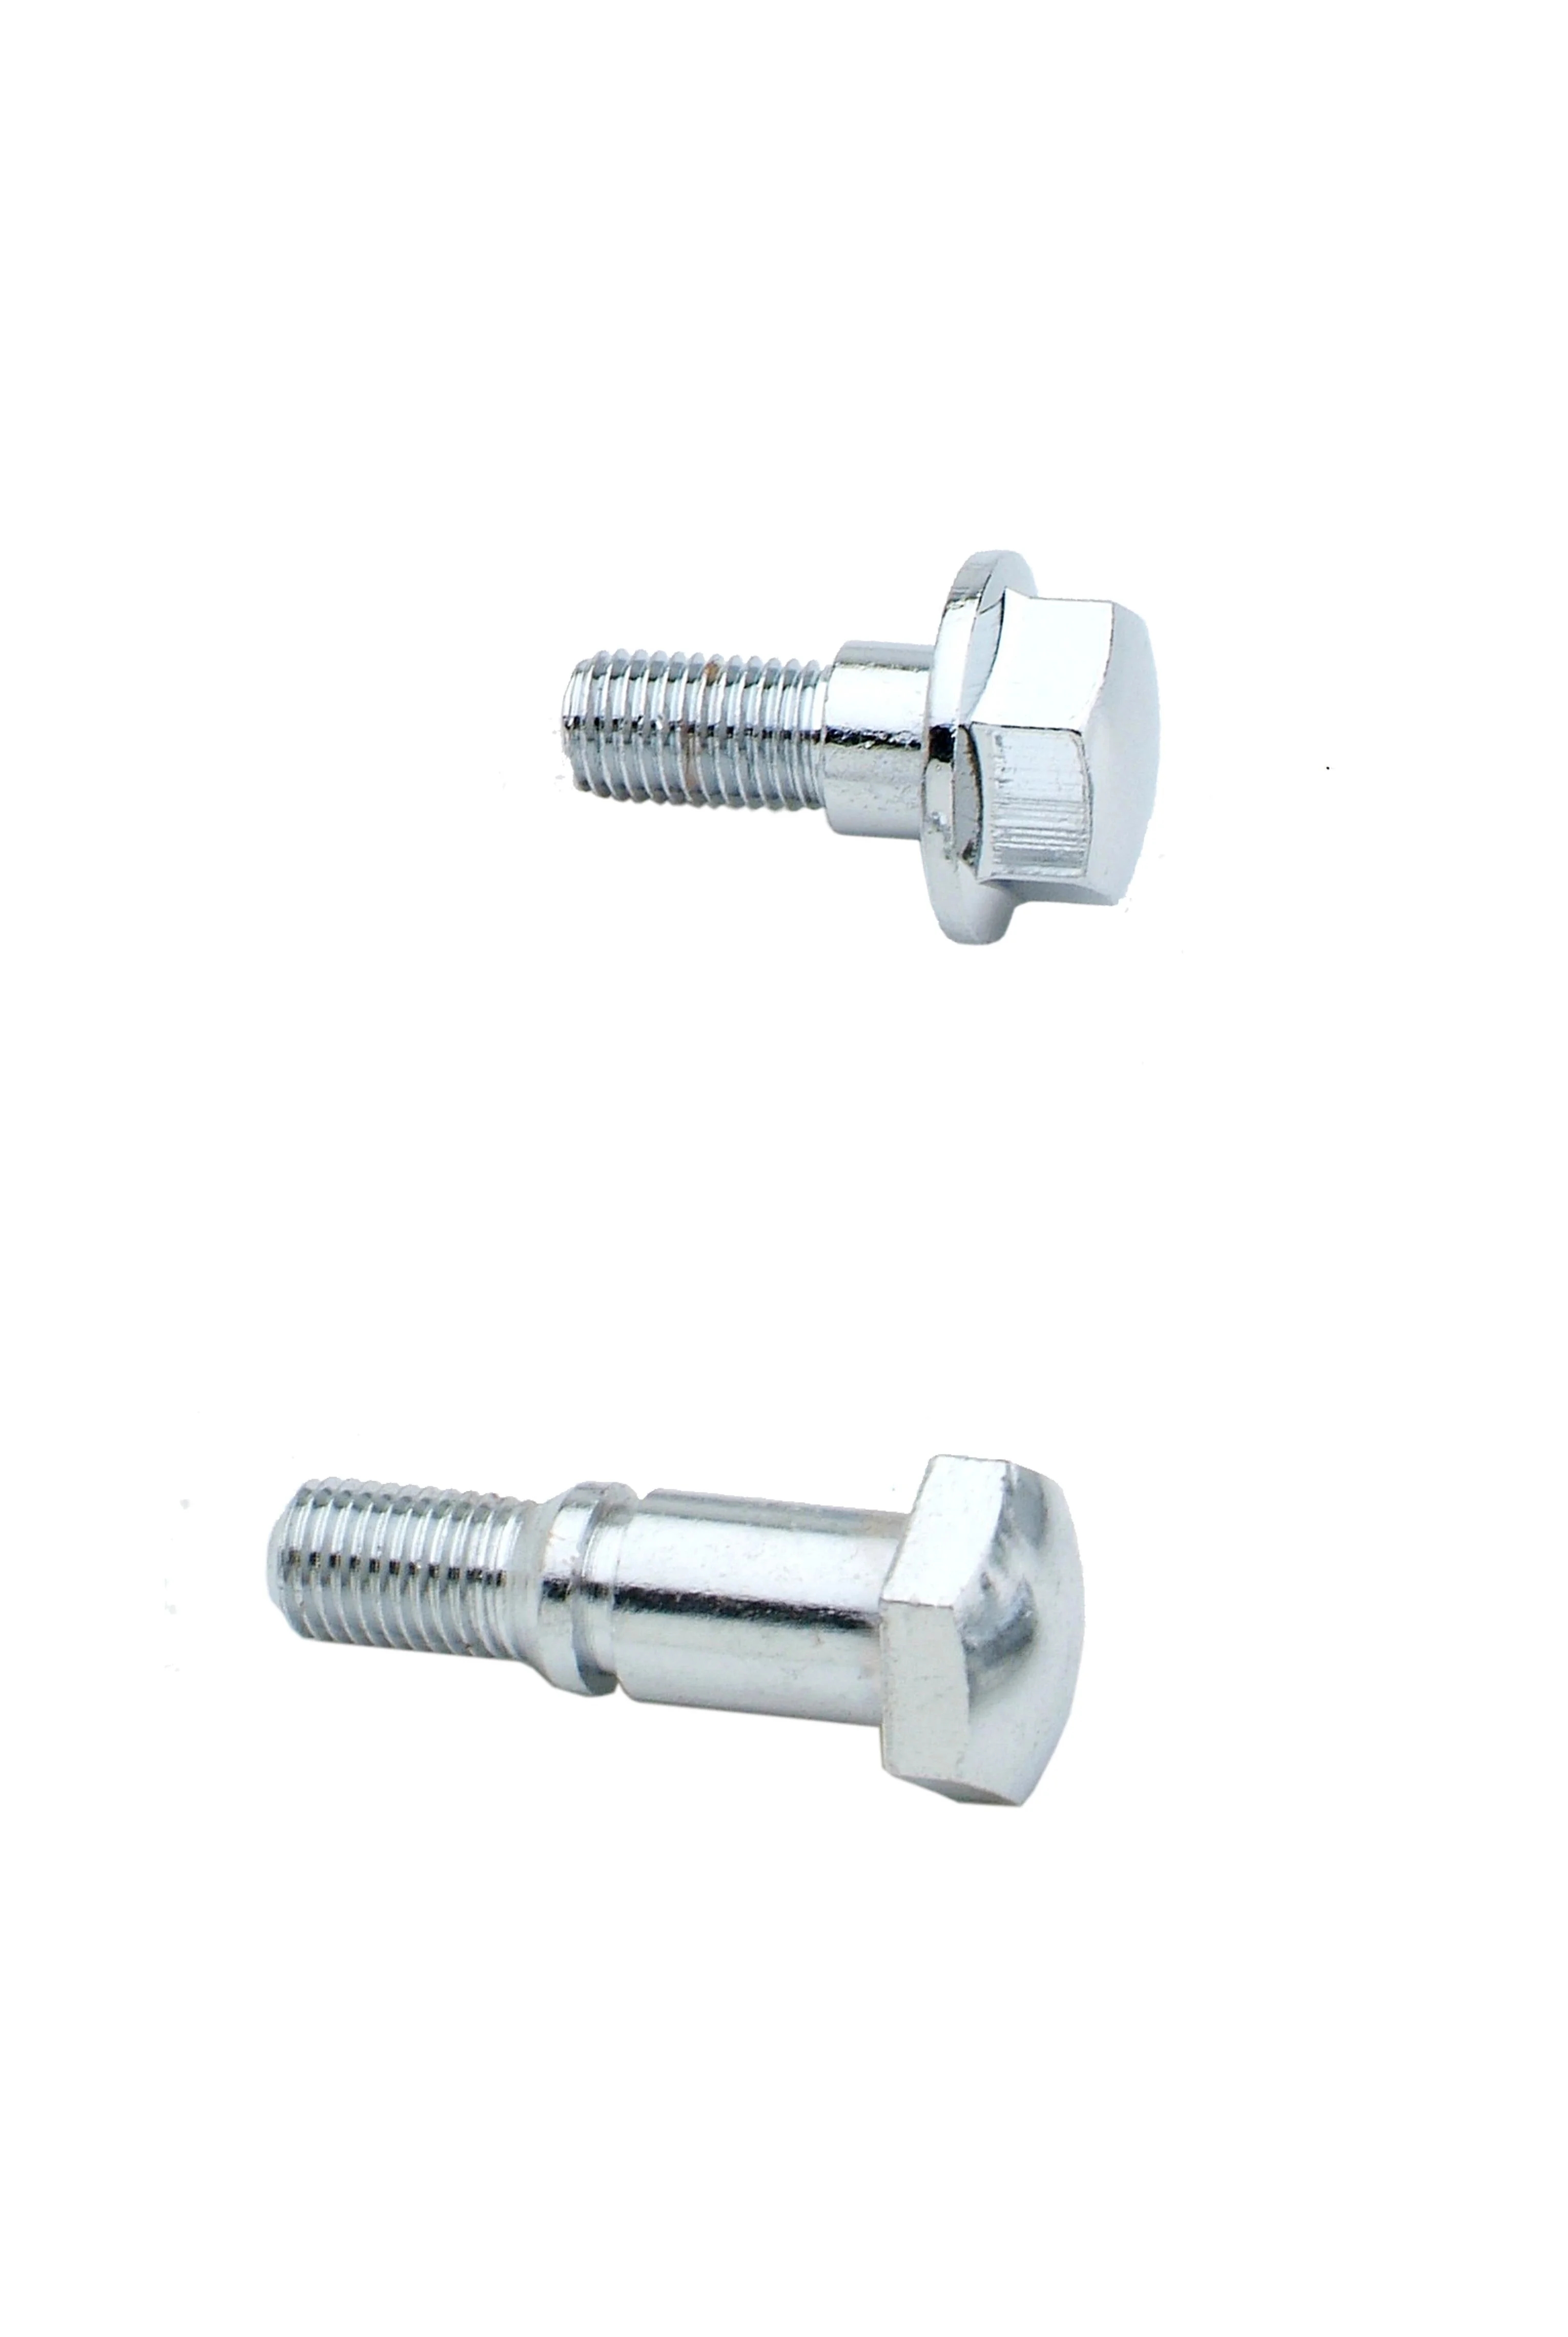 Universal-Standard-Hex-Bolt-and-Nut.Web (2)